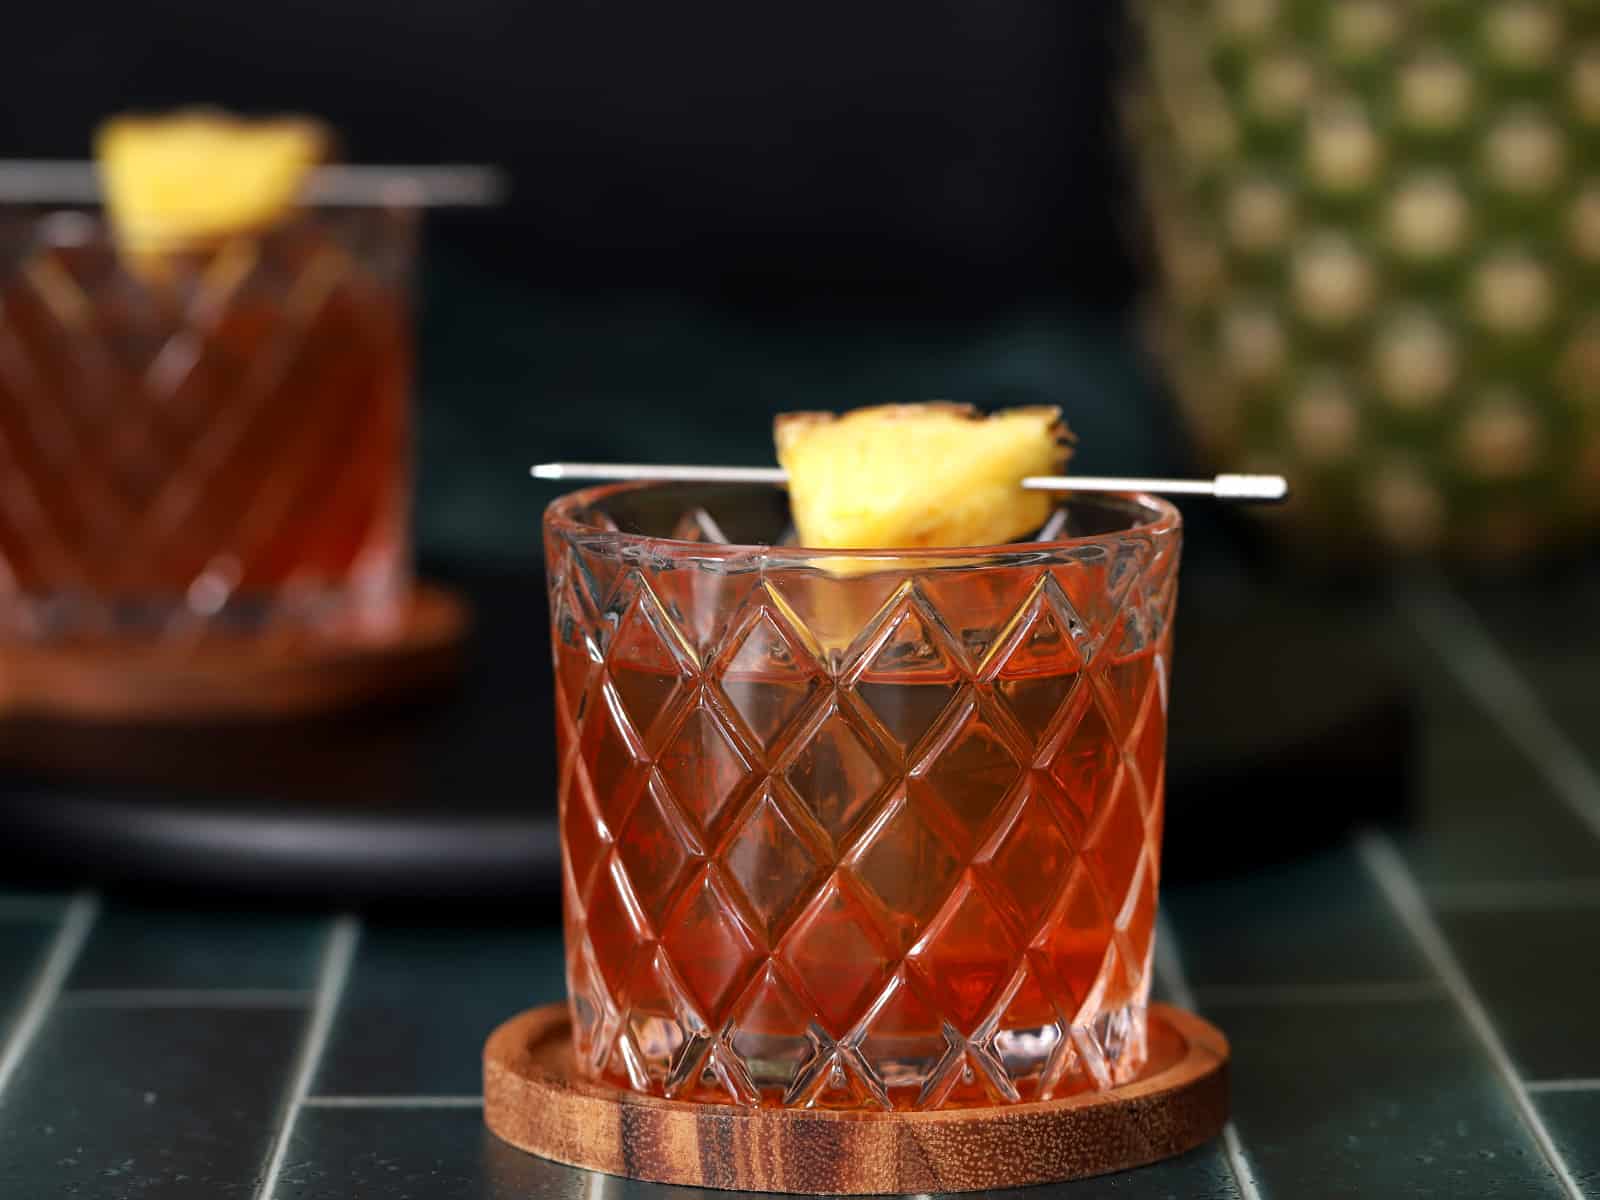 A glass of pineapple old fashioned garnished with a pineapple wedge.